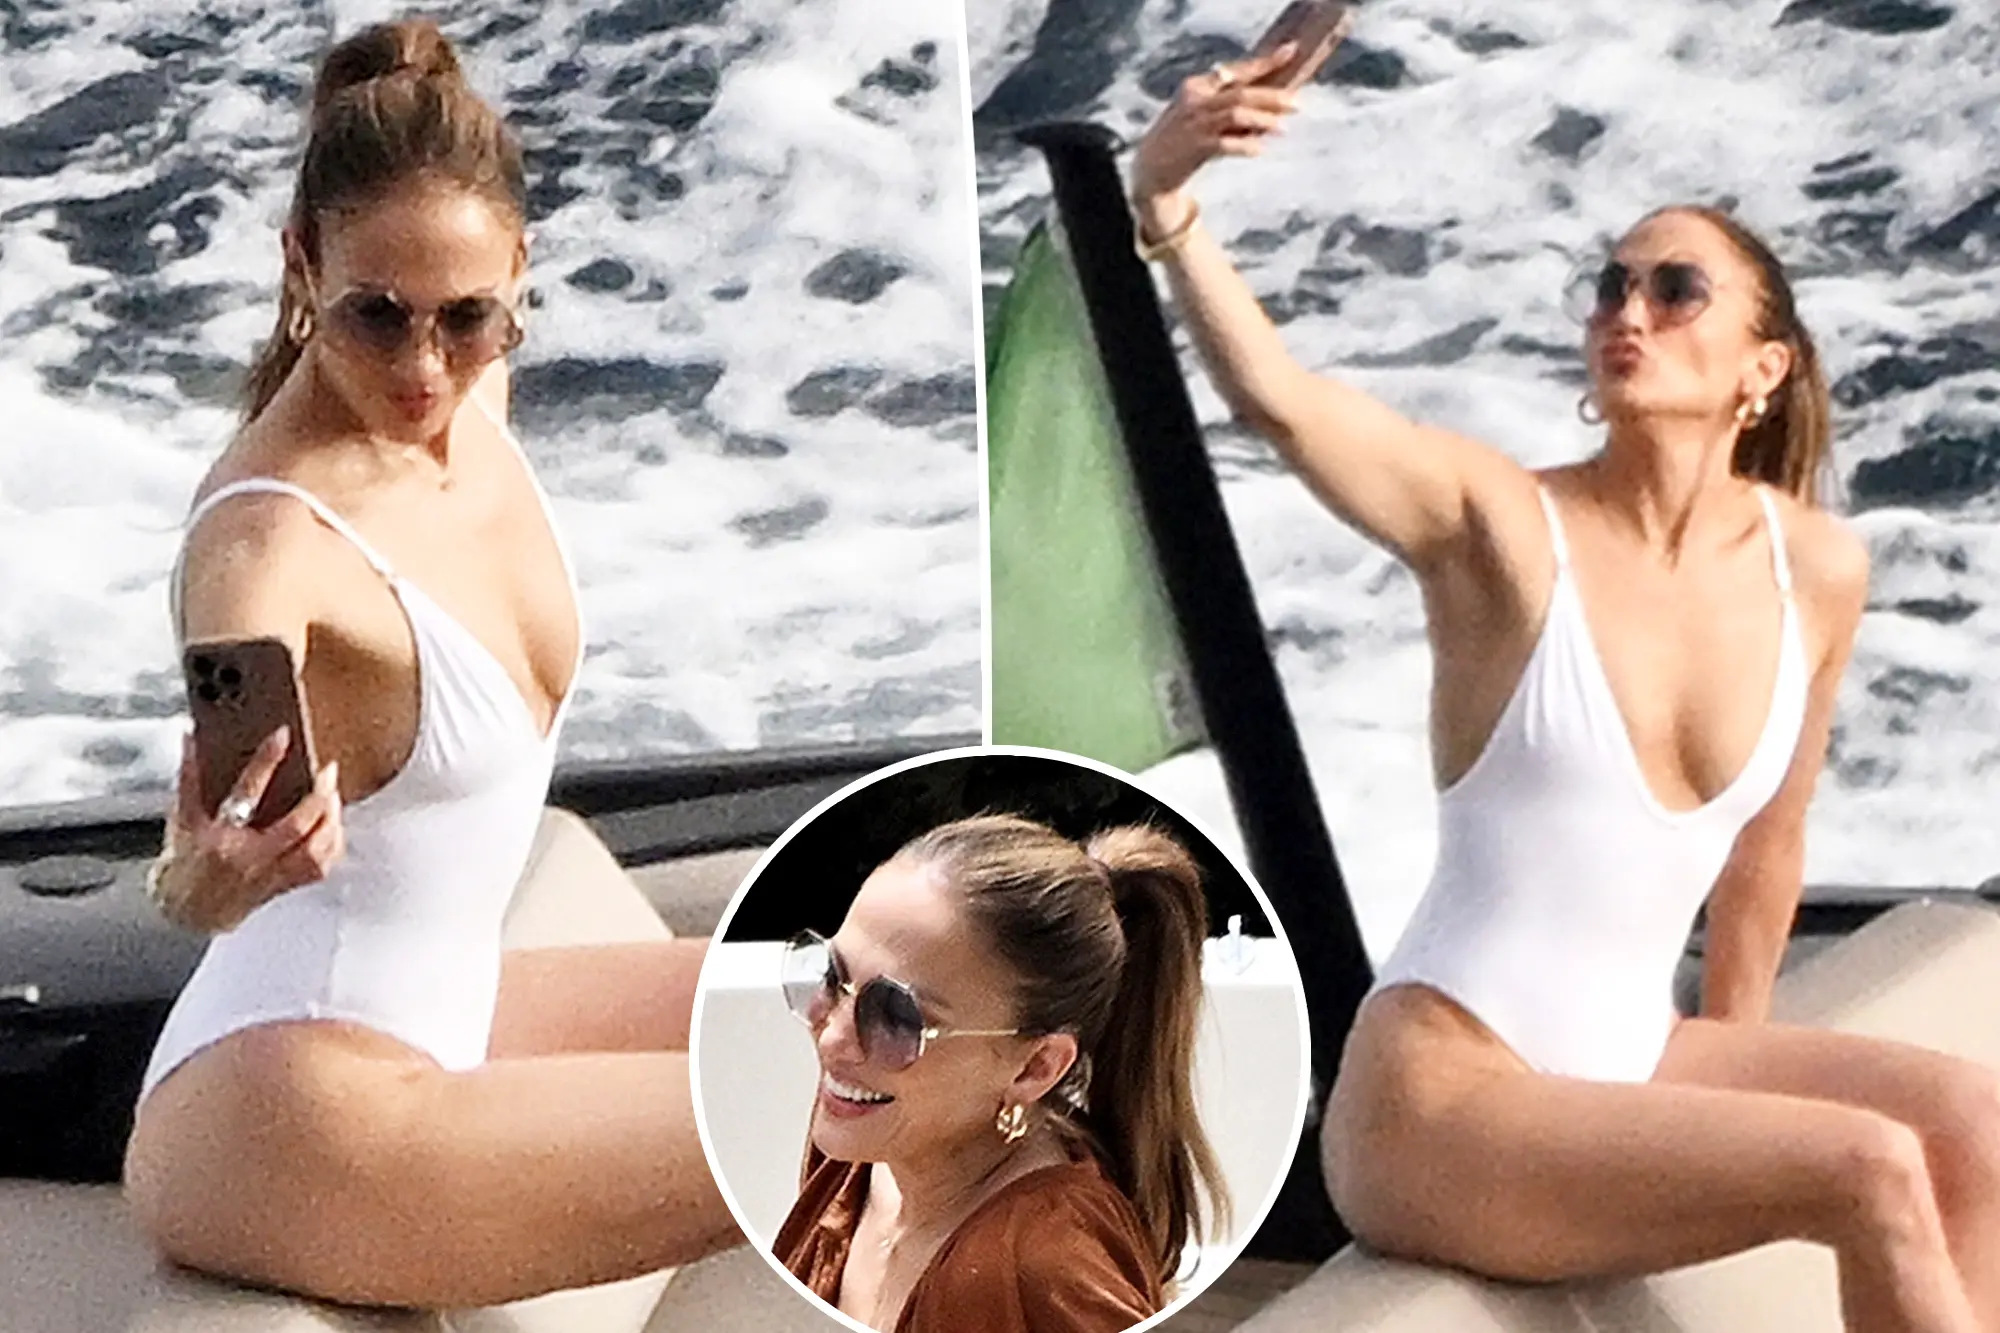 Jennifer Lopez, 54, takes RACY selfies of her famous posterior while rocking a plunging white swimsuit during vacation in Italy without husband Ben Affleck - as divorce rumors ramp up